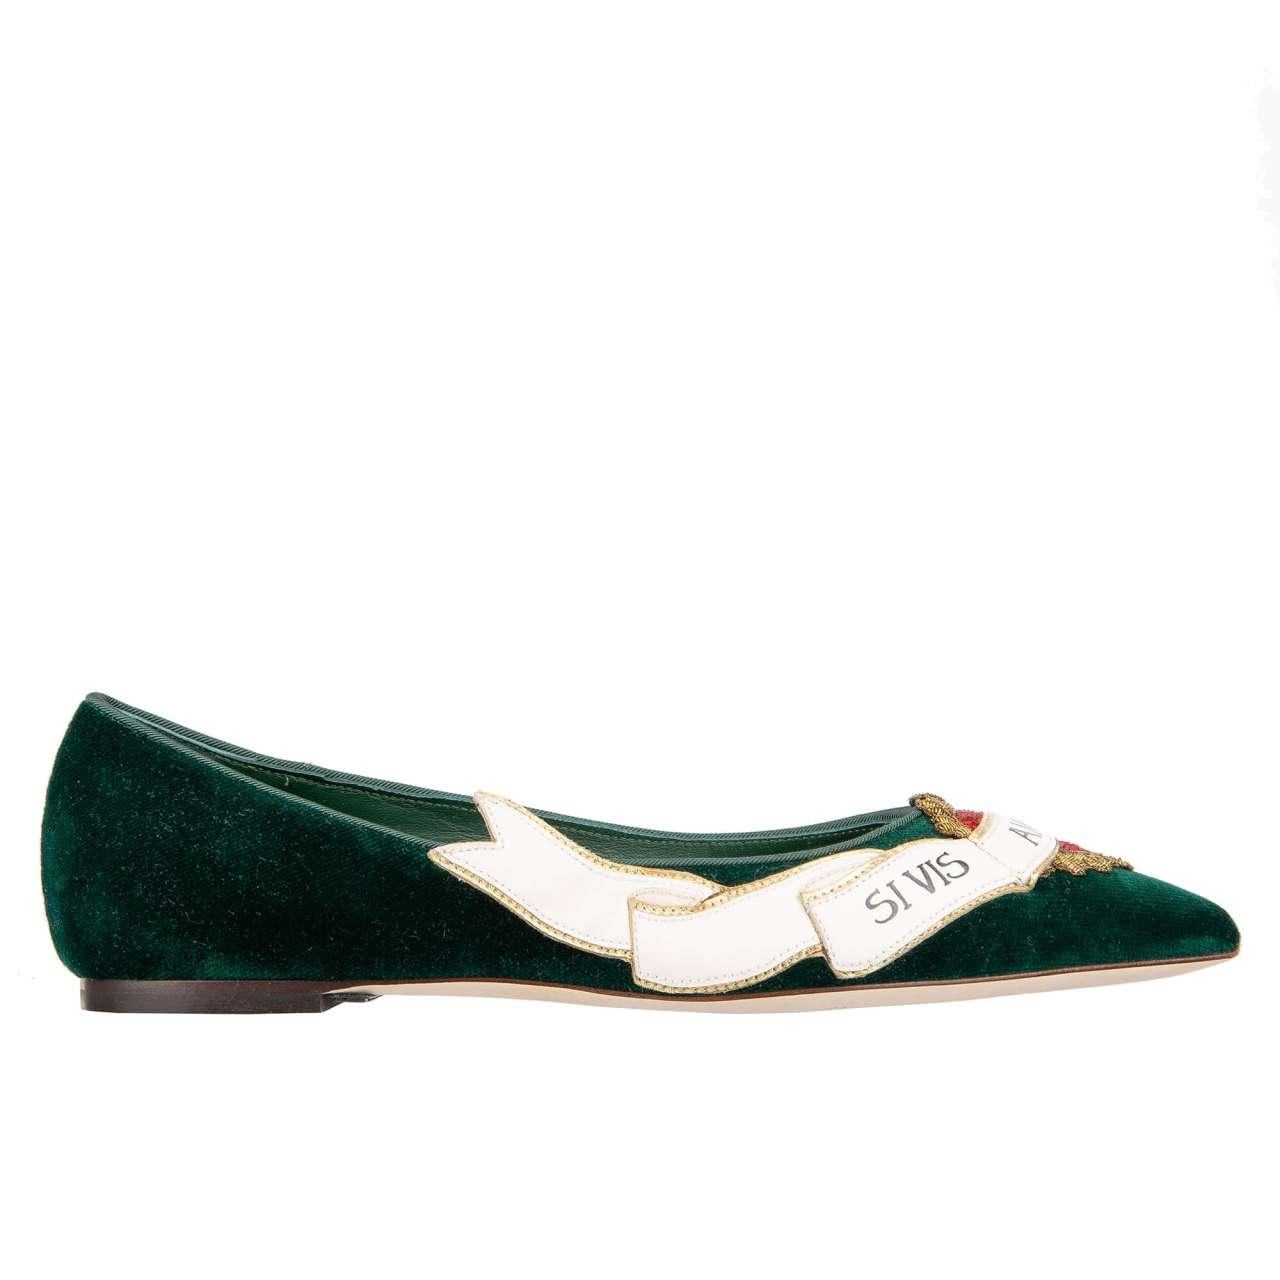 - Pointed Velvet Ballet Flats BELLUCCI in green with sequined Sacred Heart embroidery and leather banner by DOLCE & GABBANA - New with Box - MADE IN ITALY - Former RRP: EUR 795 - Sequins embroidered sacred Heart - Leather banner 